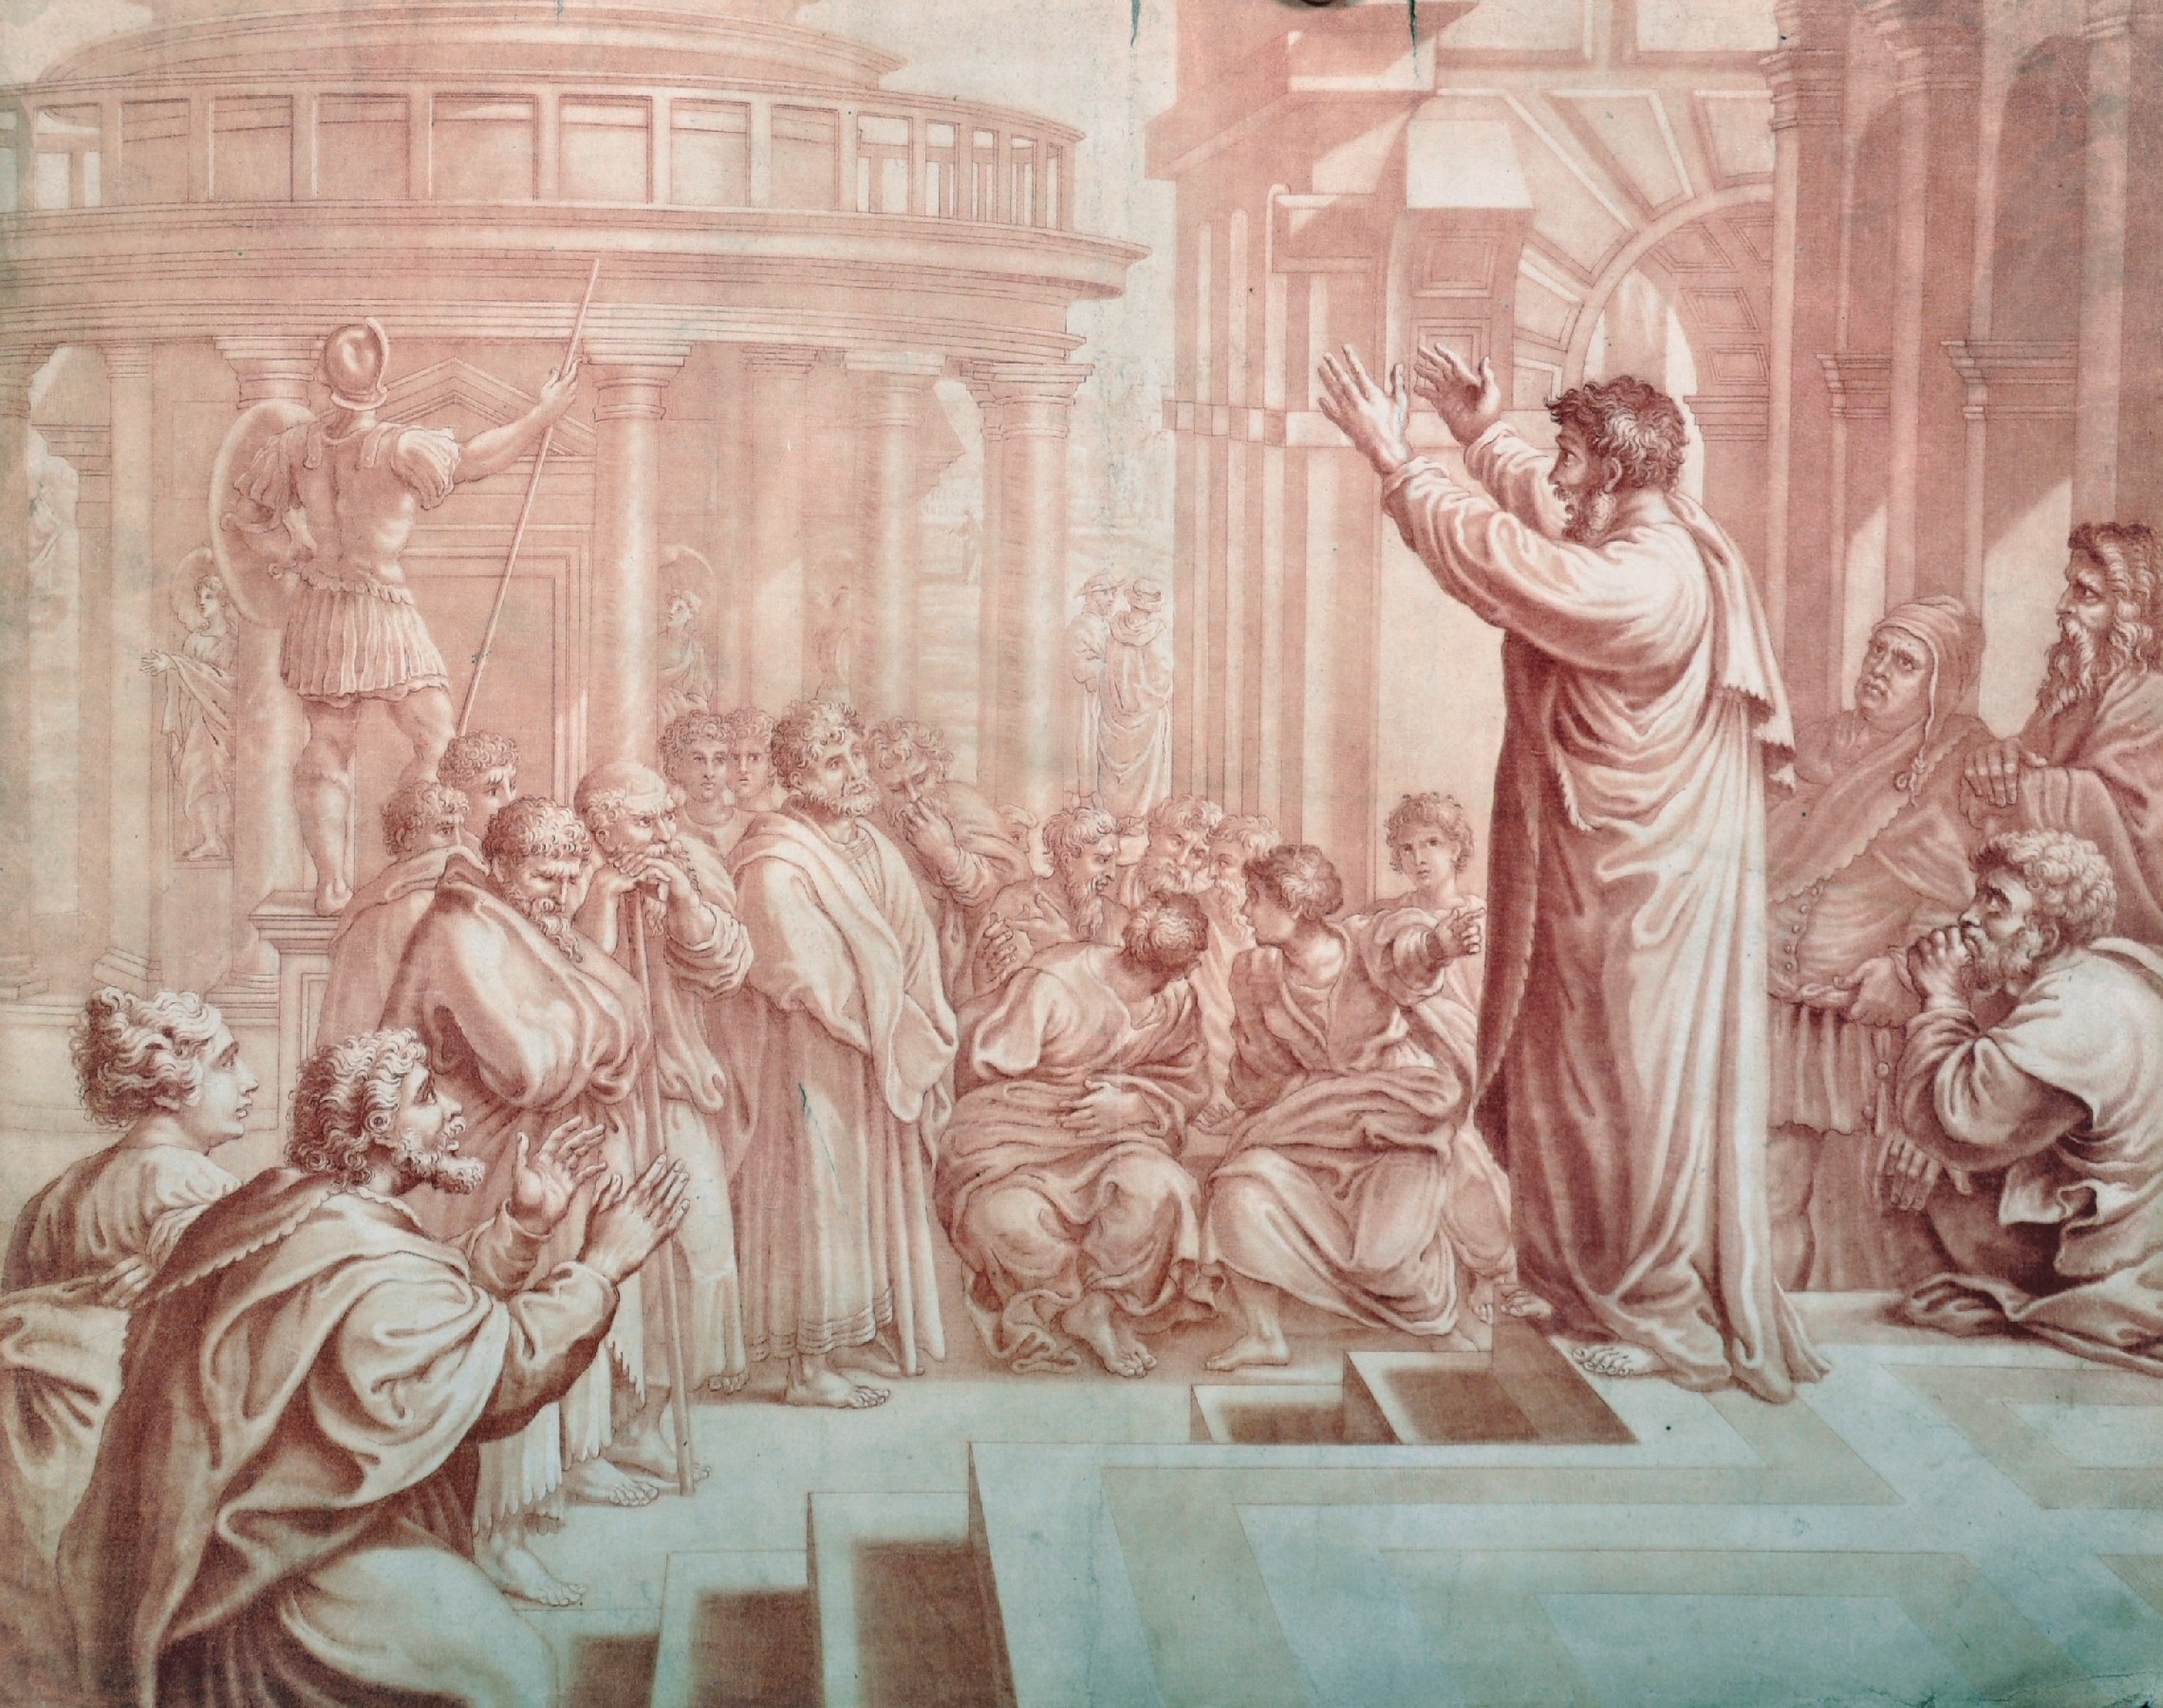 19th Century Italian School. A Figure in Robes talking to the Masses outside a Classical Italian - Image 2 of 5